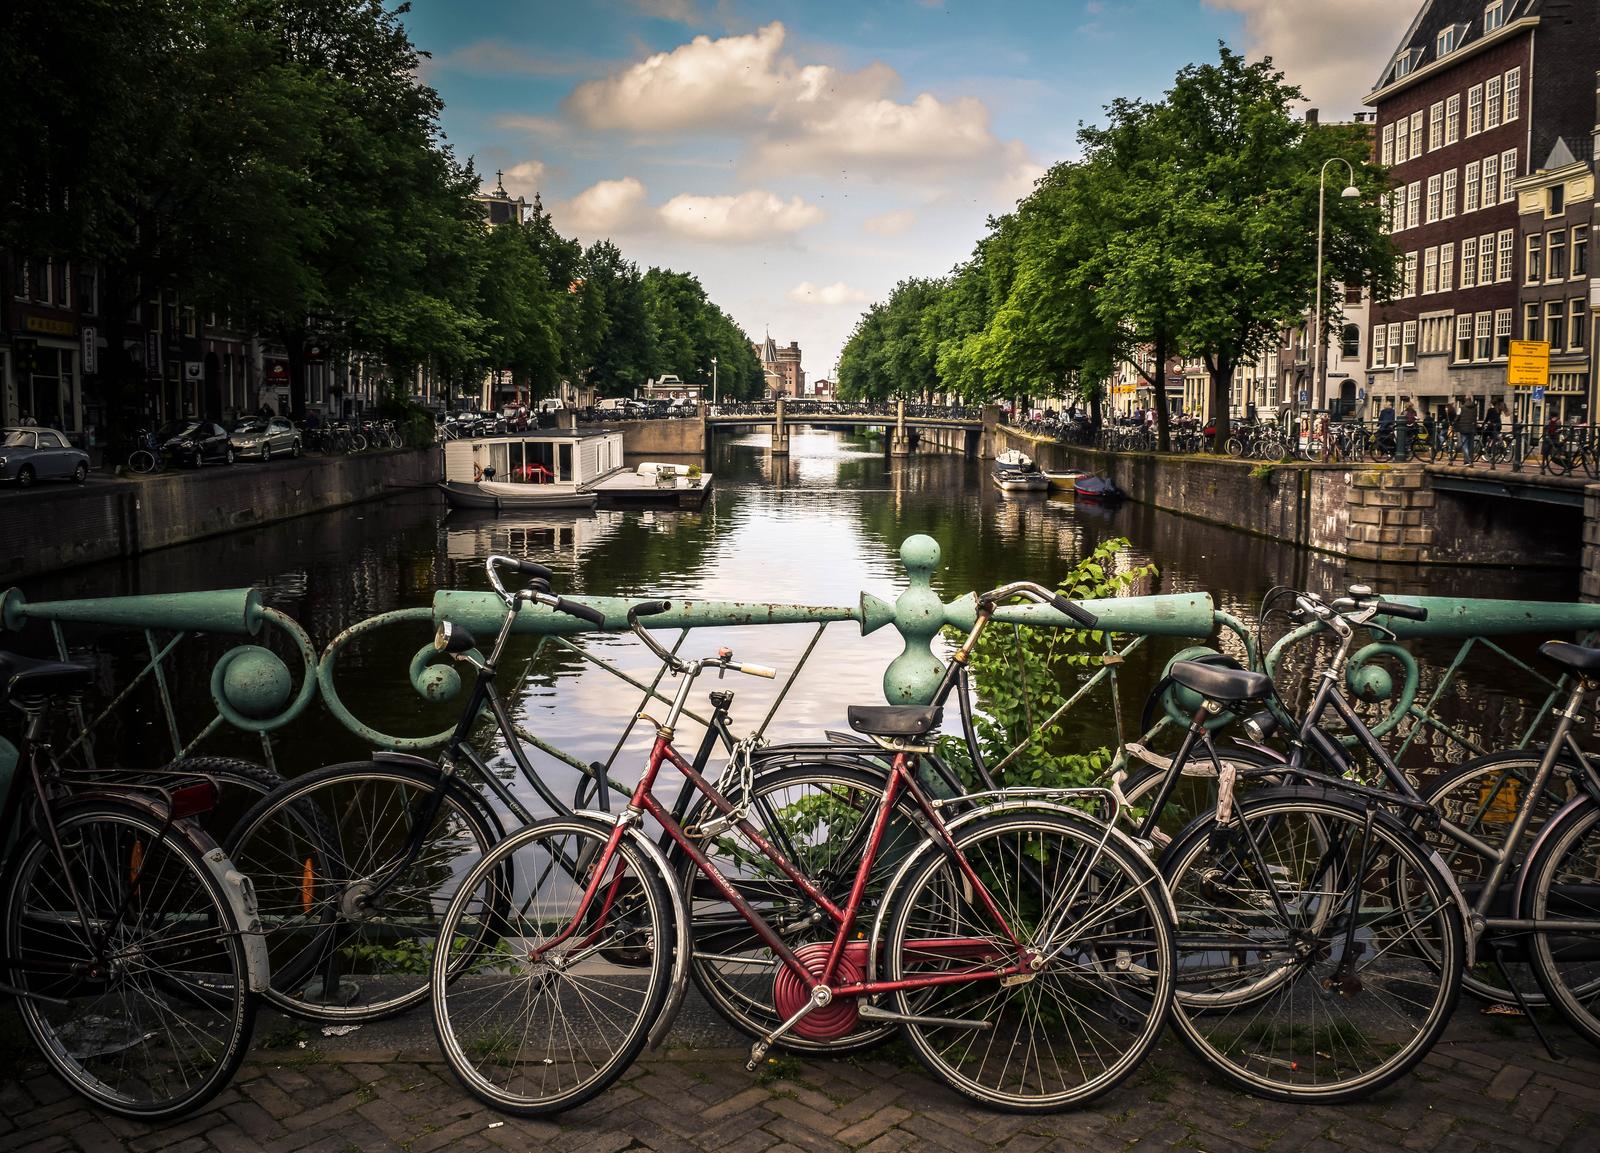 9 In 10 Americans Can't Recognize European Cities Quiz Amsterdam, Netherlands